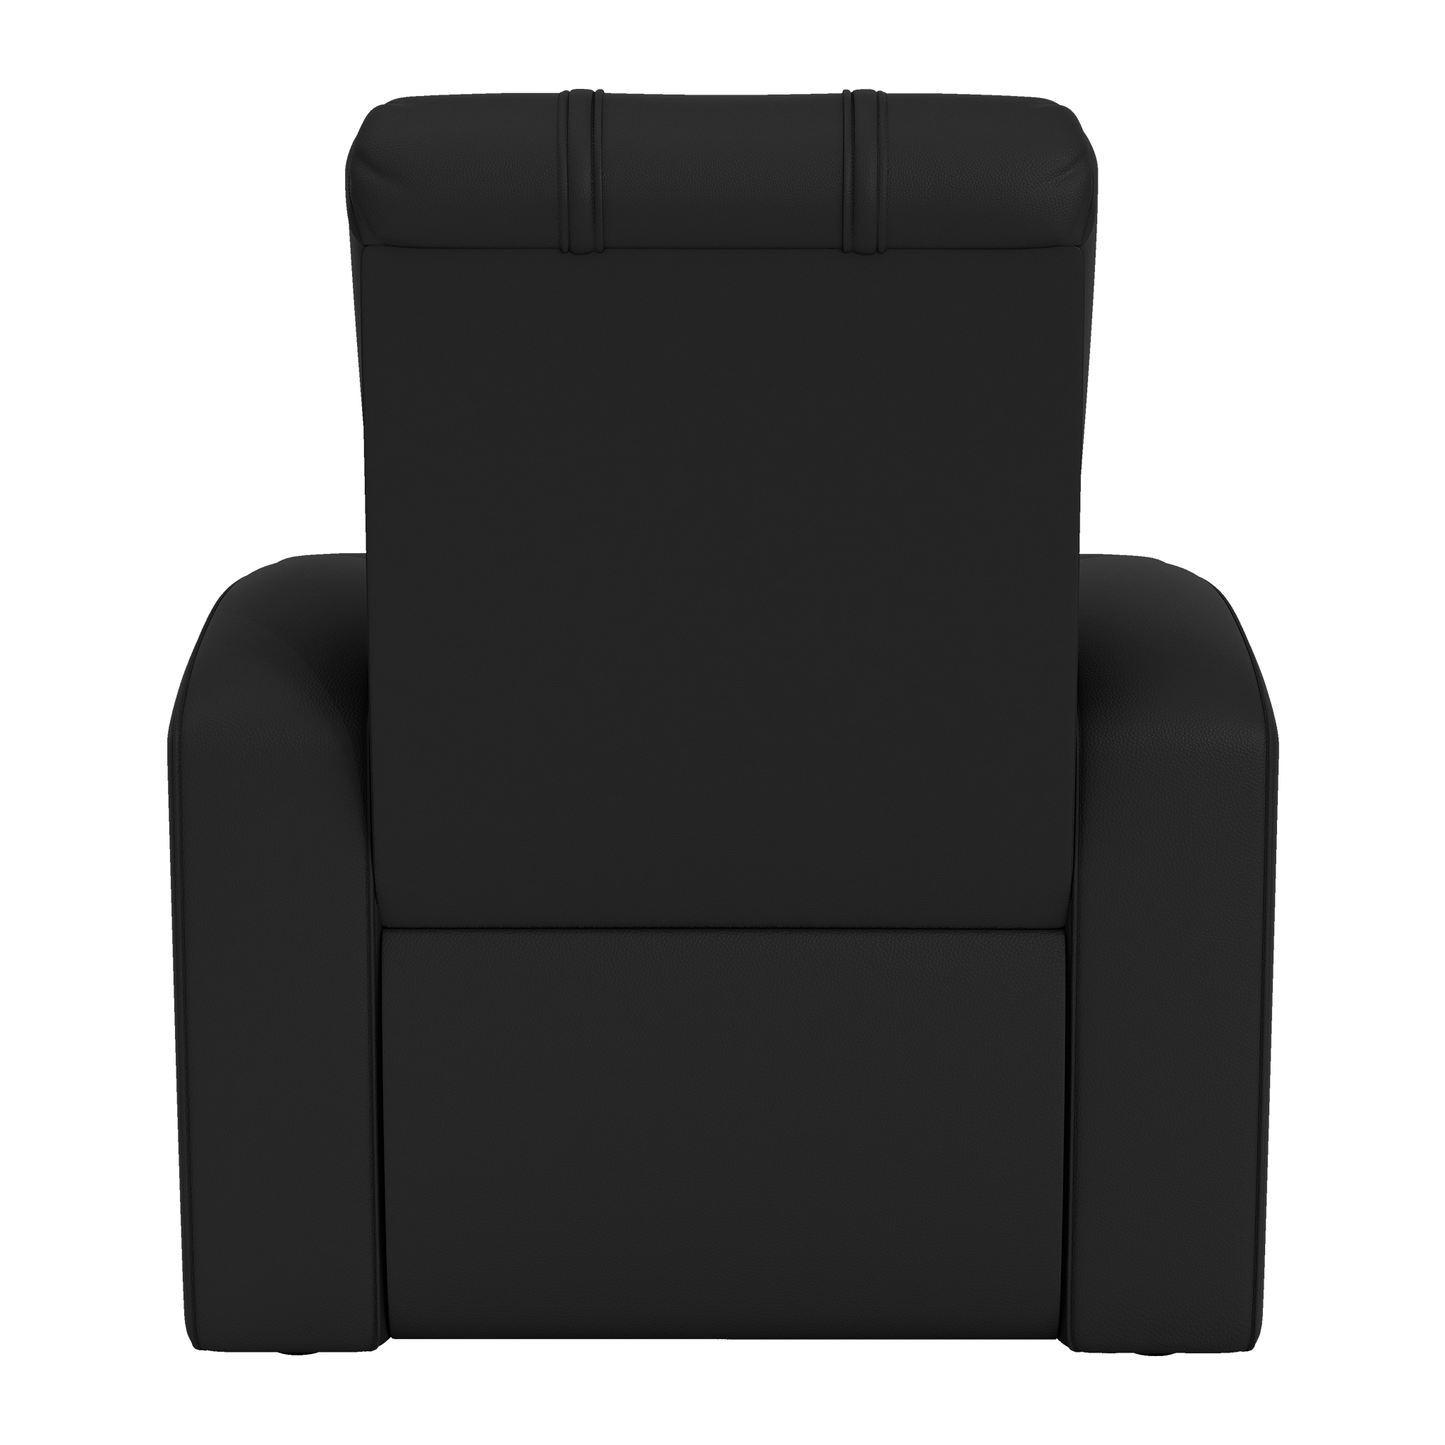 Relax Home Theater Recliner with Memphis Grizzlies Primary Logo